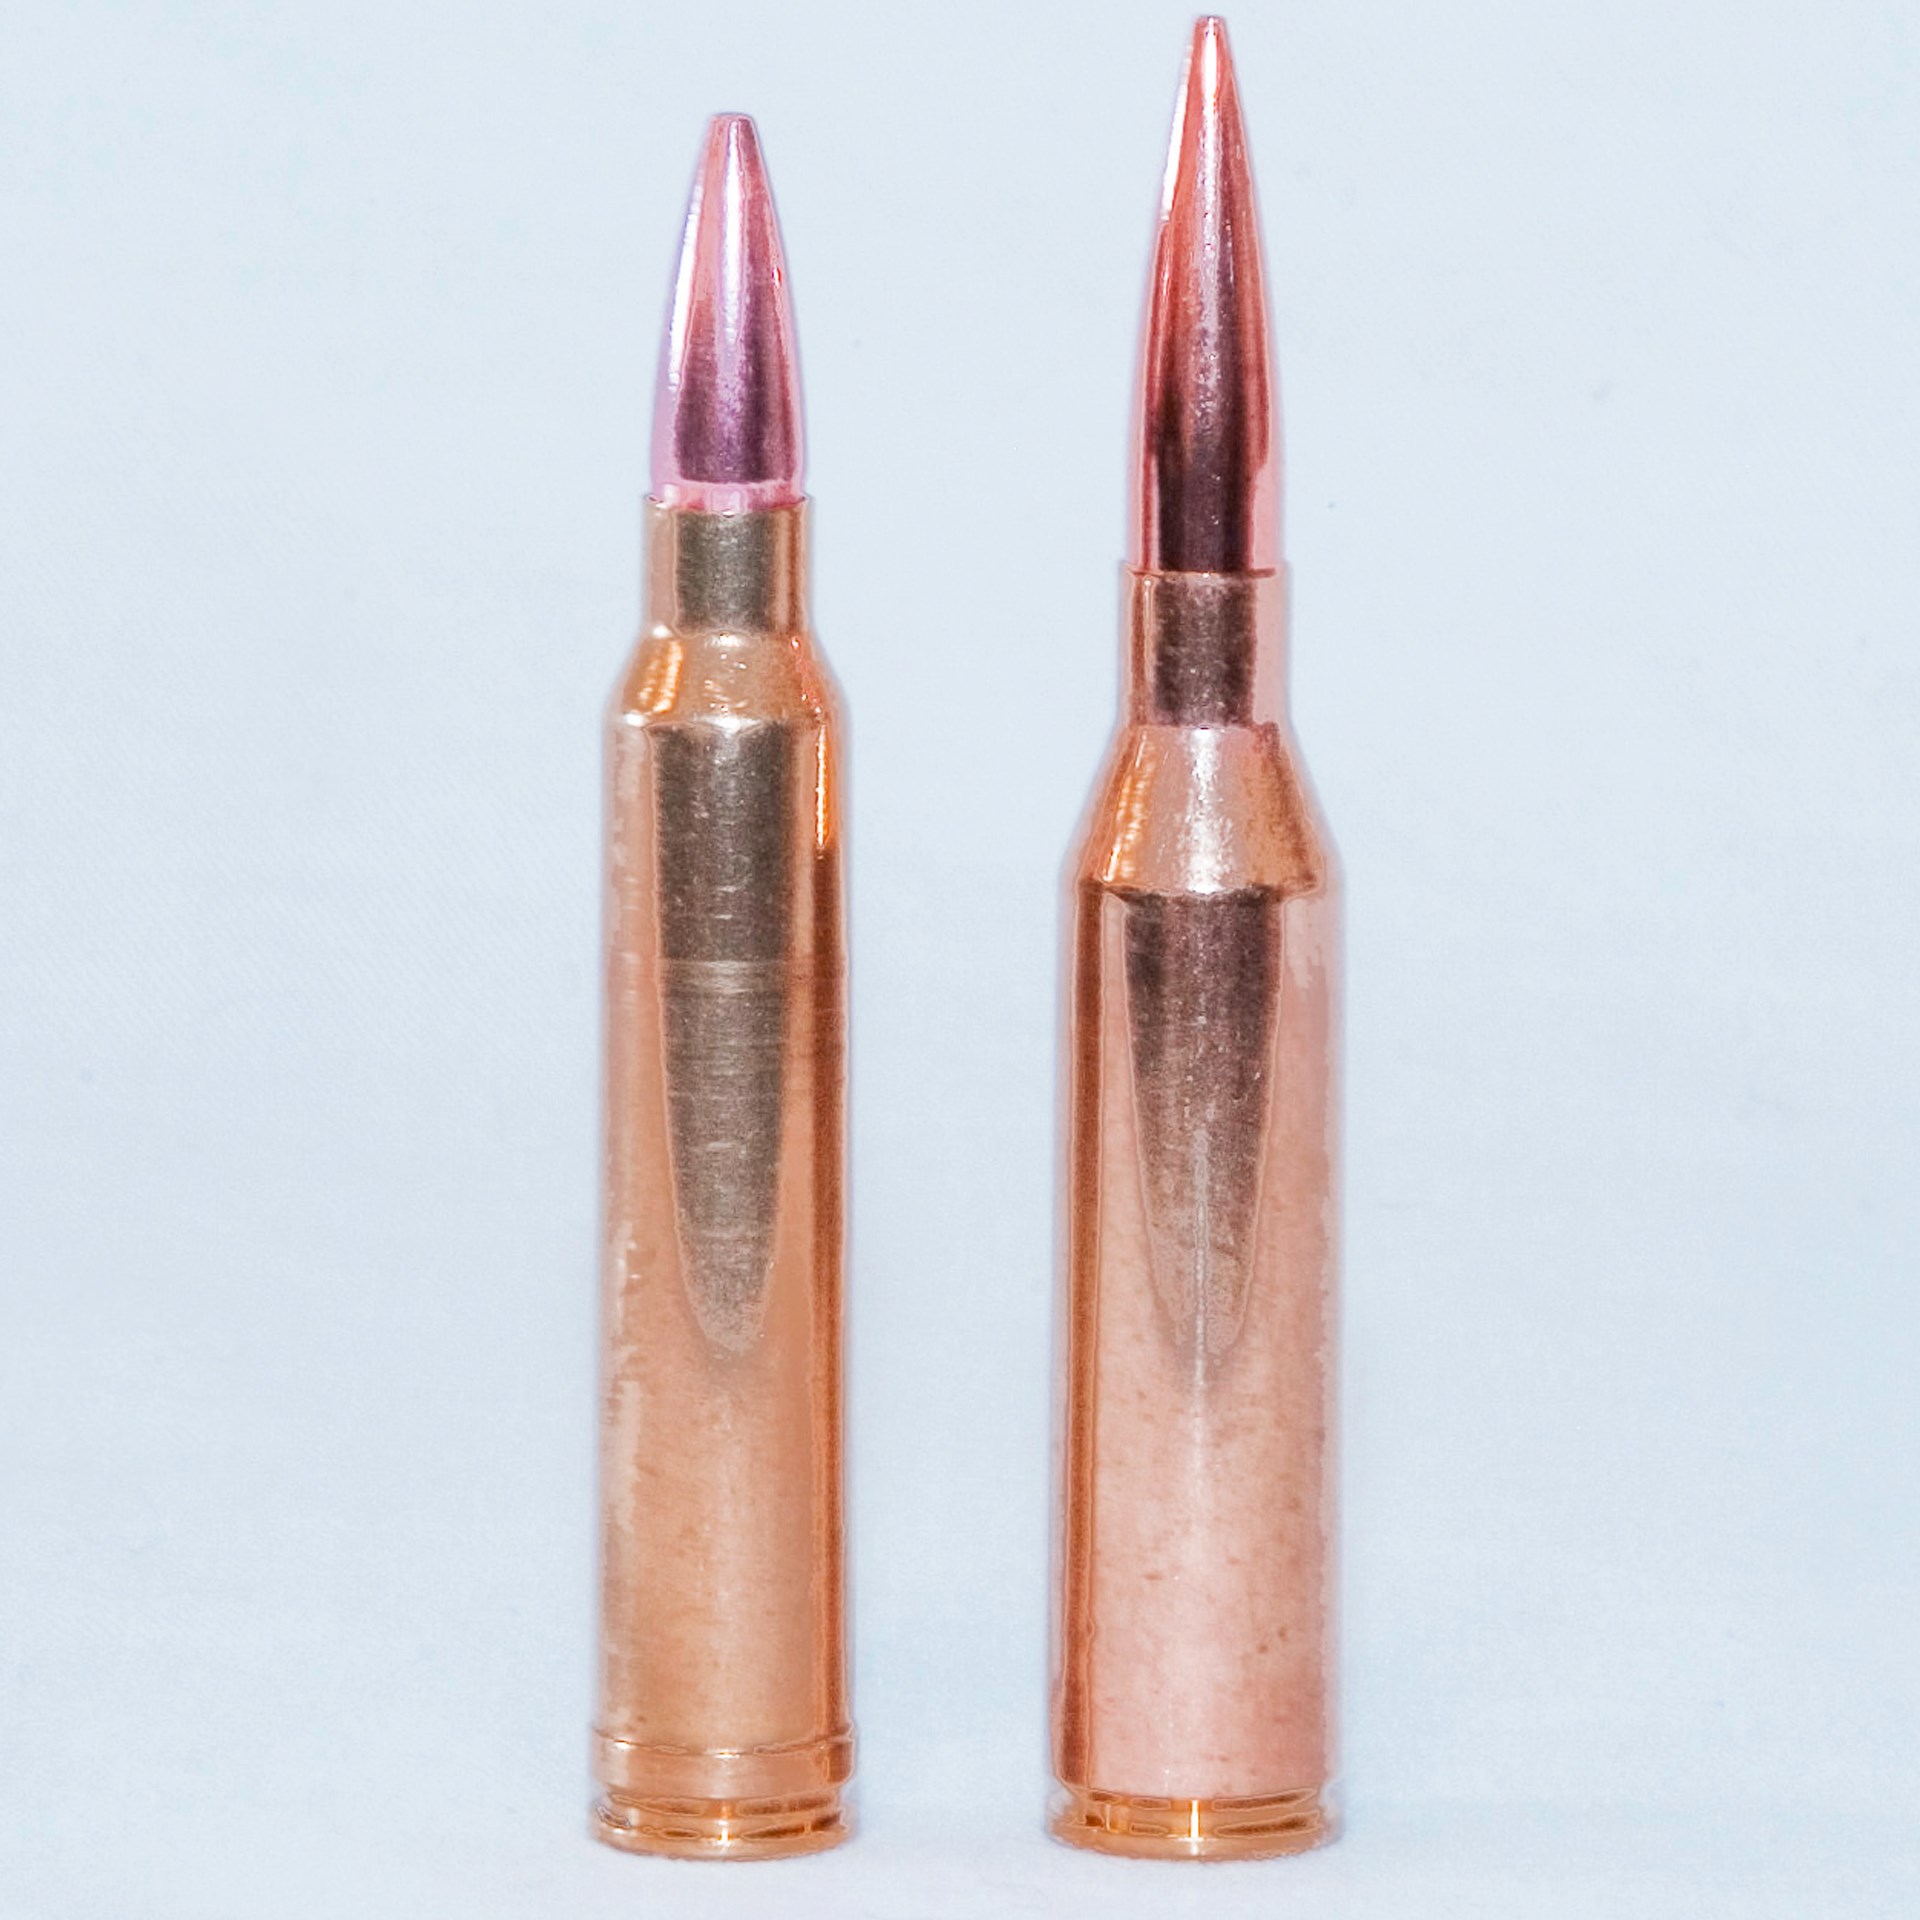 cartridge comparsion two bullets vertical side by side .300 win mag left and 300 norma mag on right brass yellow white background